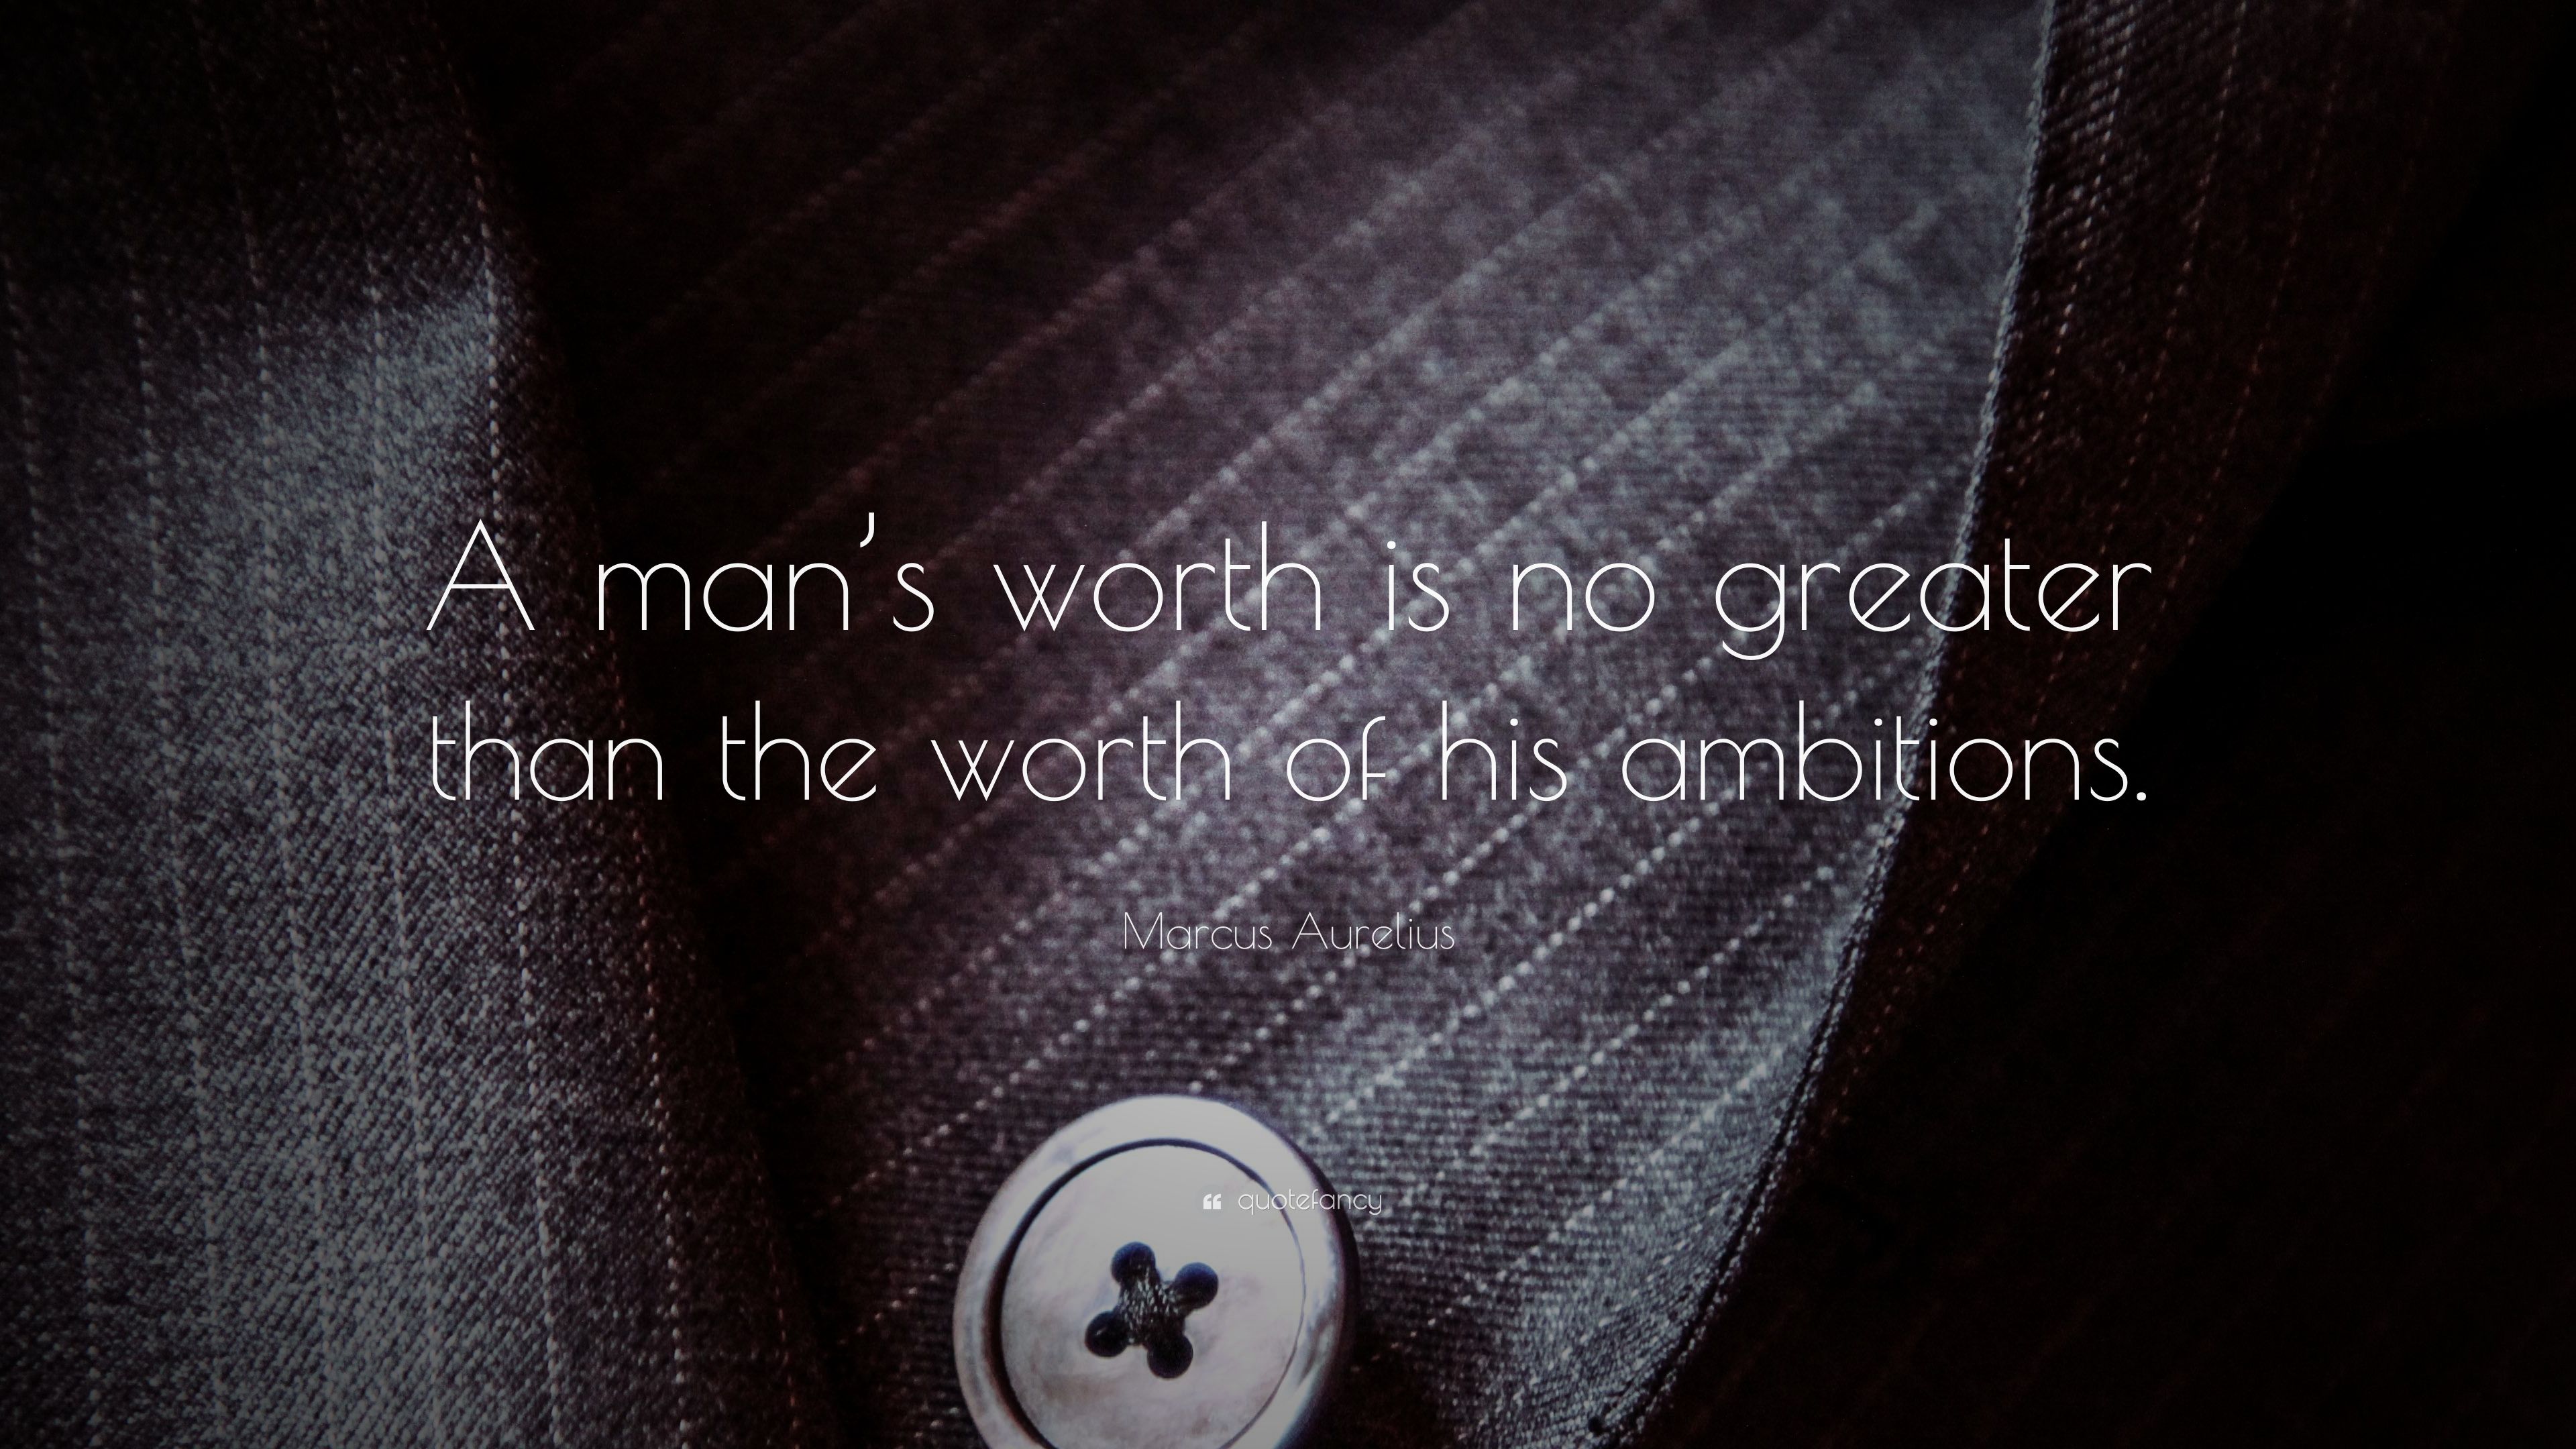 Marcus Aurelius Quote: “A man's worth is no greater than the worth of his ambitions.” (24 wallpaper)